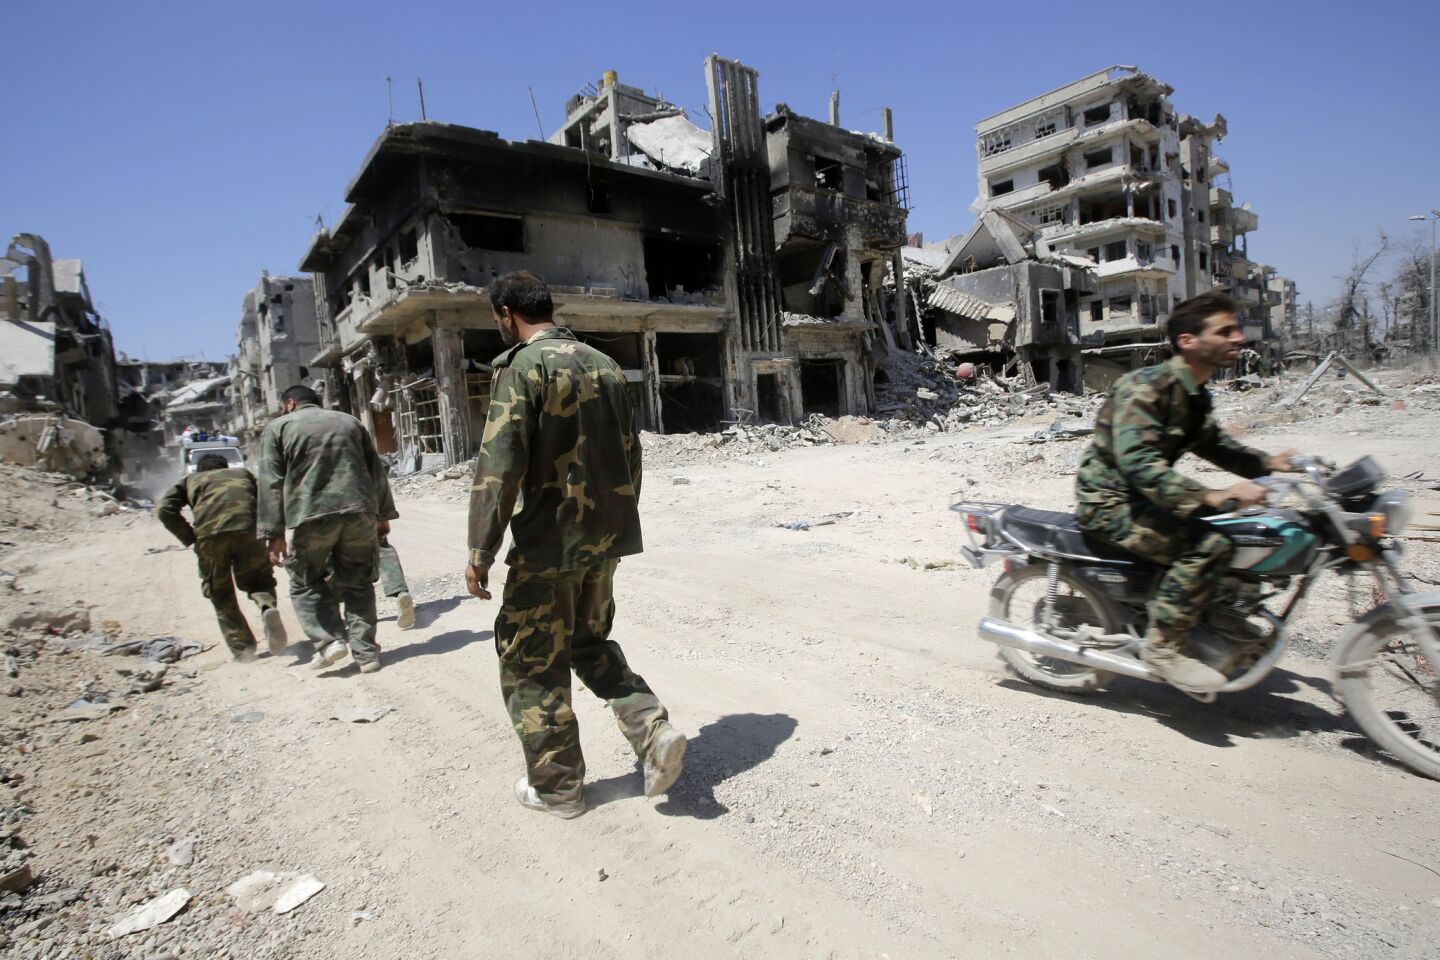 Syrian government forces patrol the Khaldiyeh district of Syria's central city of Homs. The Syrian government announced on July 29 the capture of Khaldiyeh, a key rebel district in Homs.